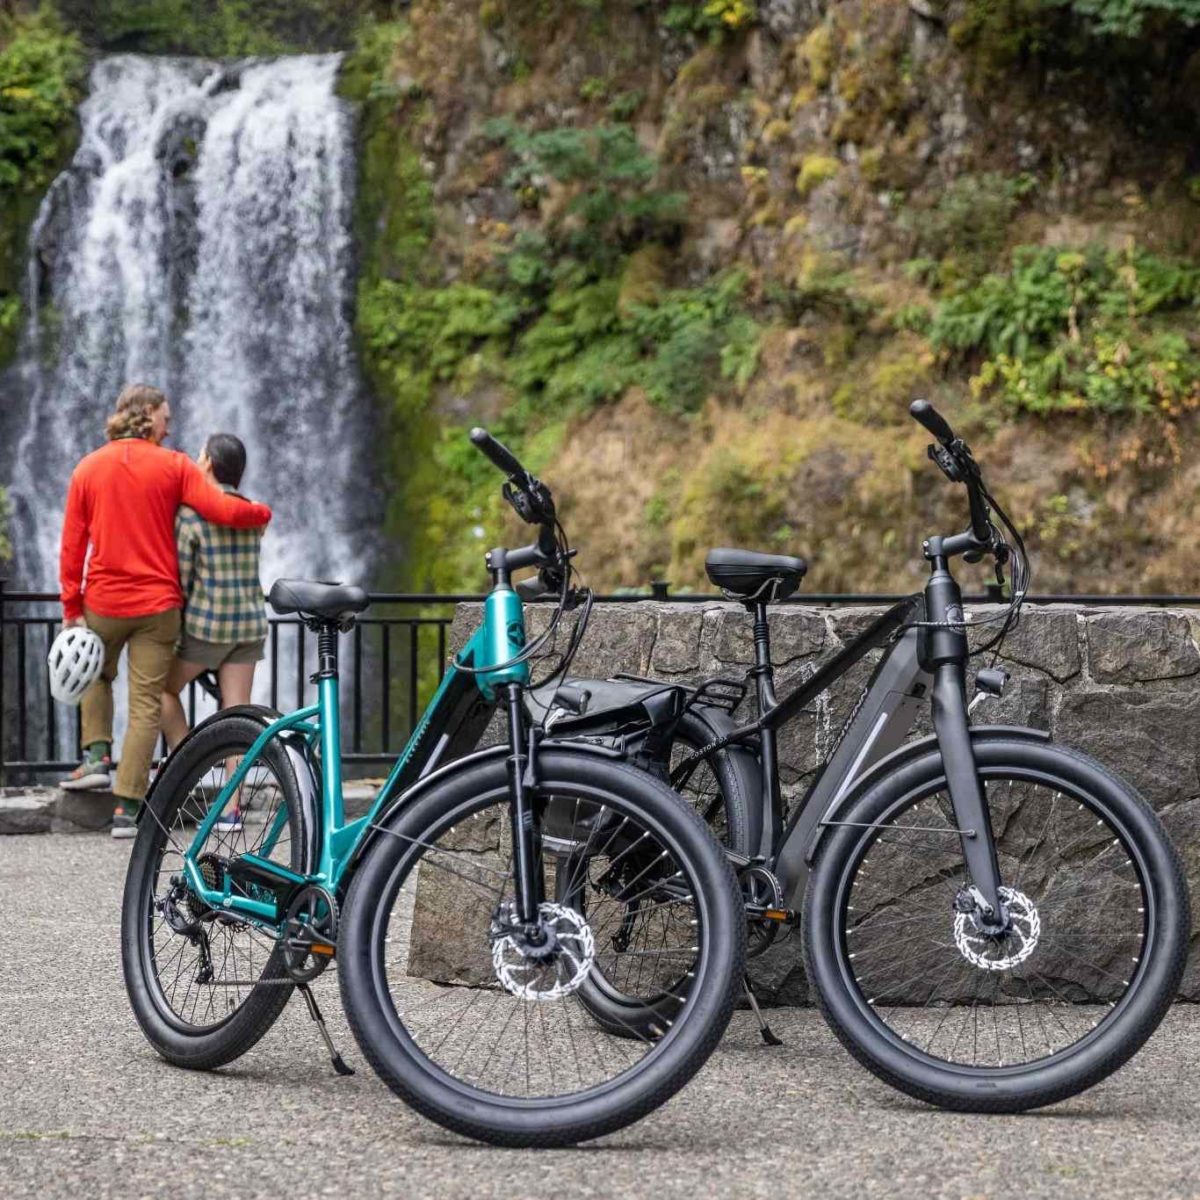 11 Best eBike Brands Must Read This Before Buying